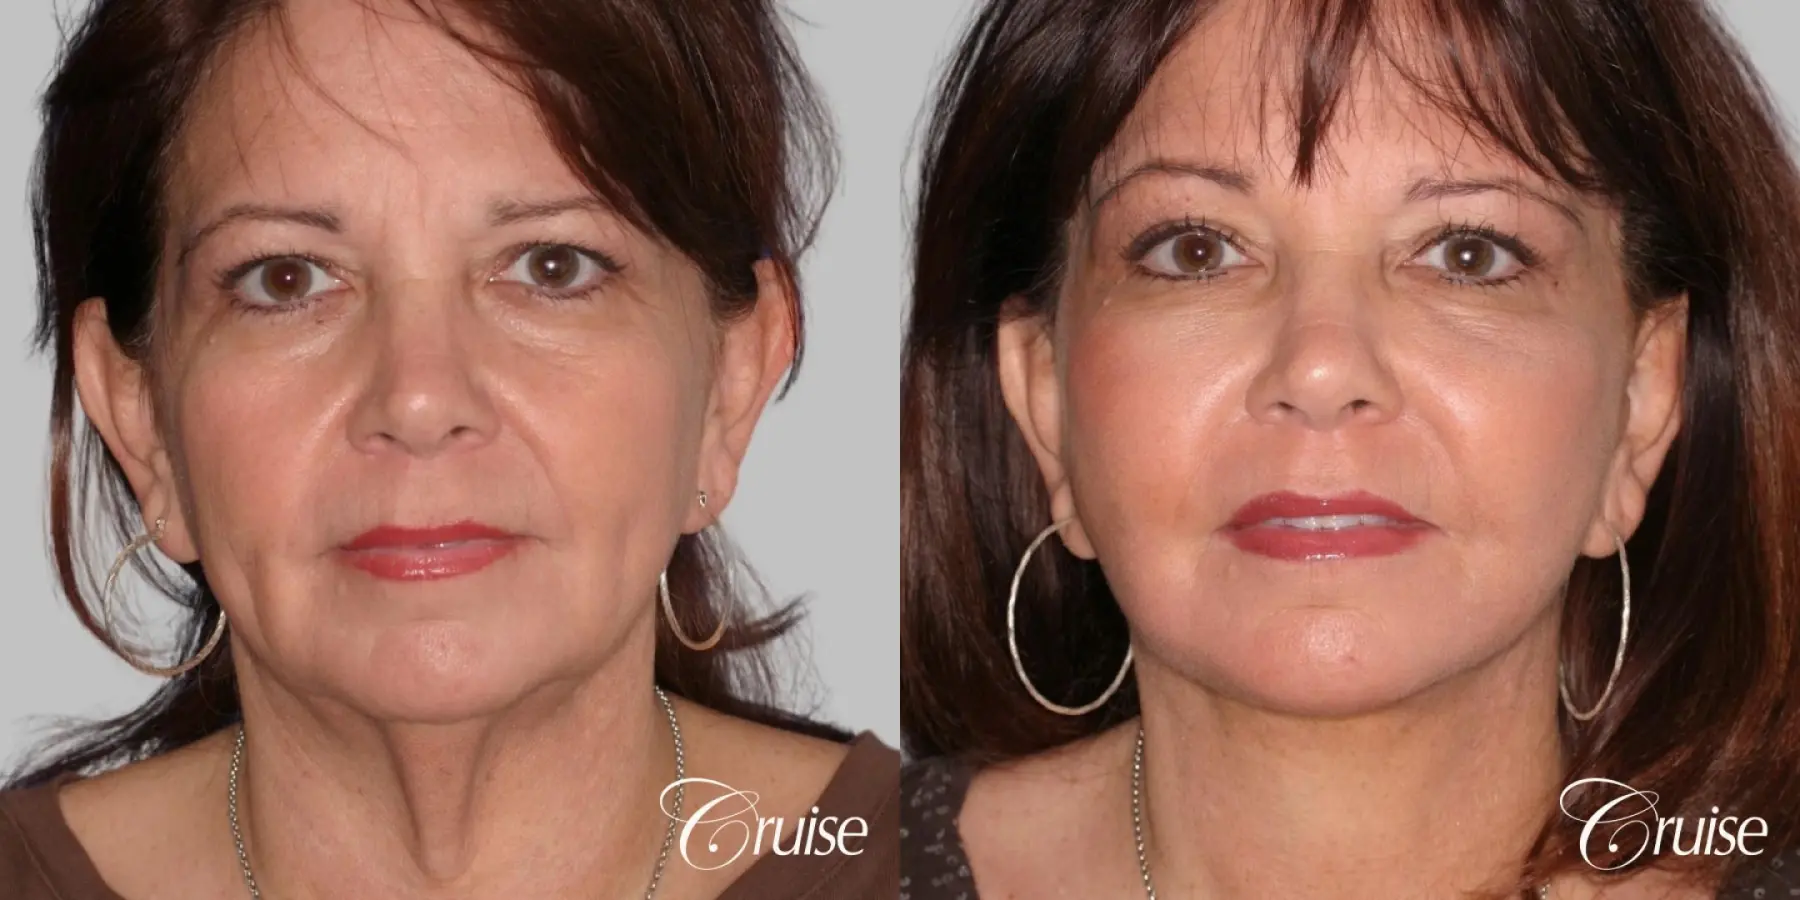 Female - Facelift, Neck Midline Plication, Fat Transfer to Cheeks - Before and After  